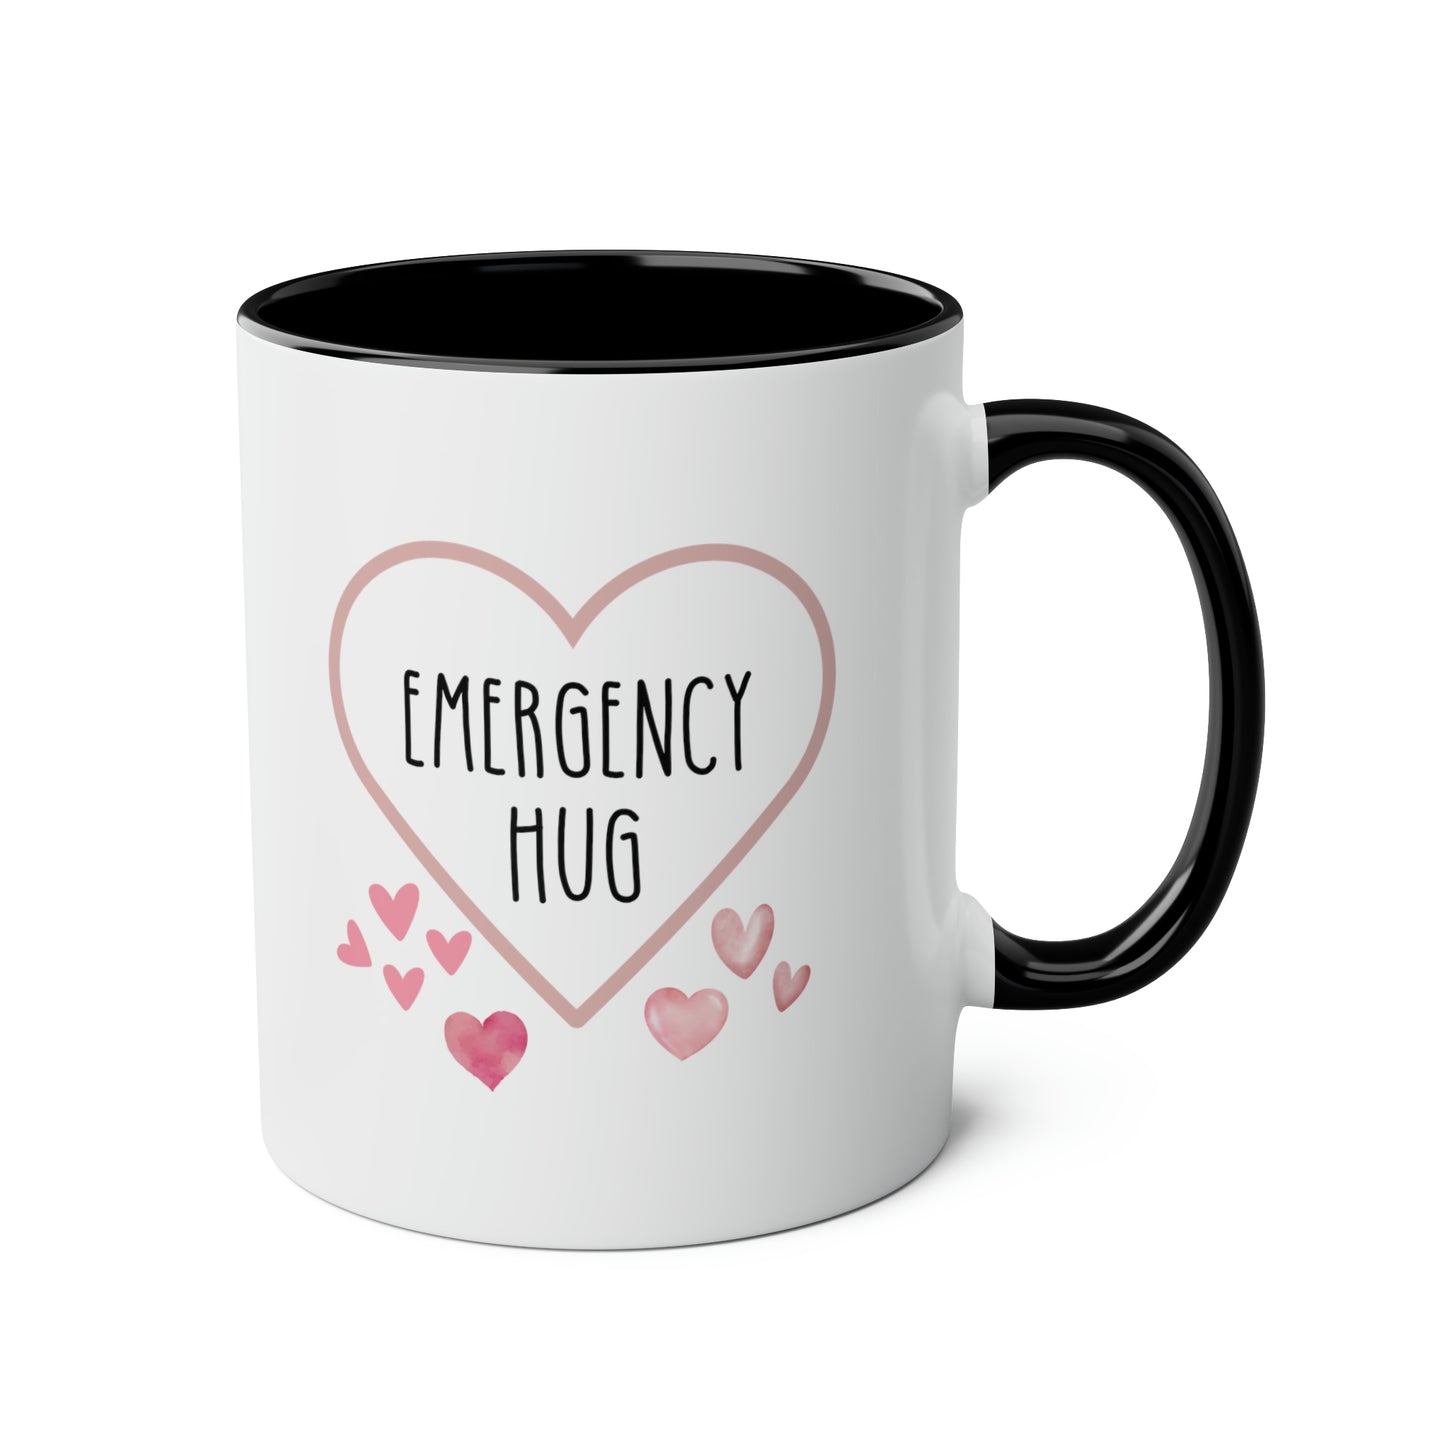 Emergency Hug 11oz white with black accent funny large coffee mug gift for mental health comforting uplifting encouraging anxiety pocket waveywares wavey wares wavywares wavy wares